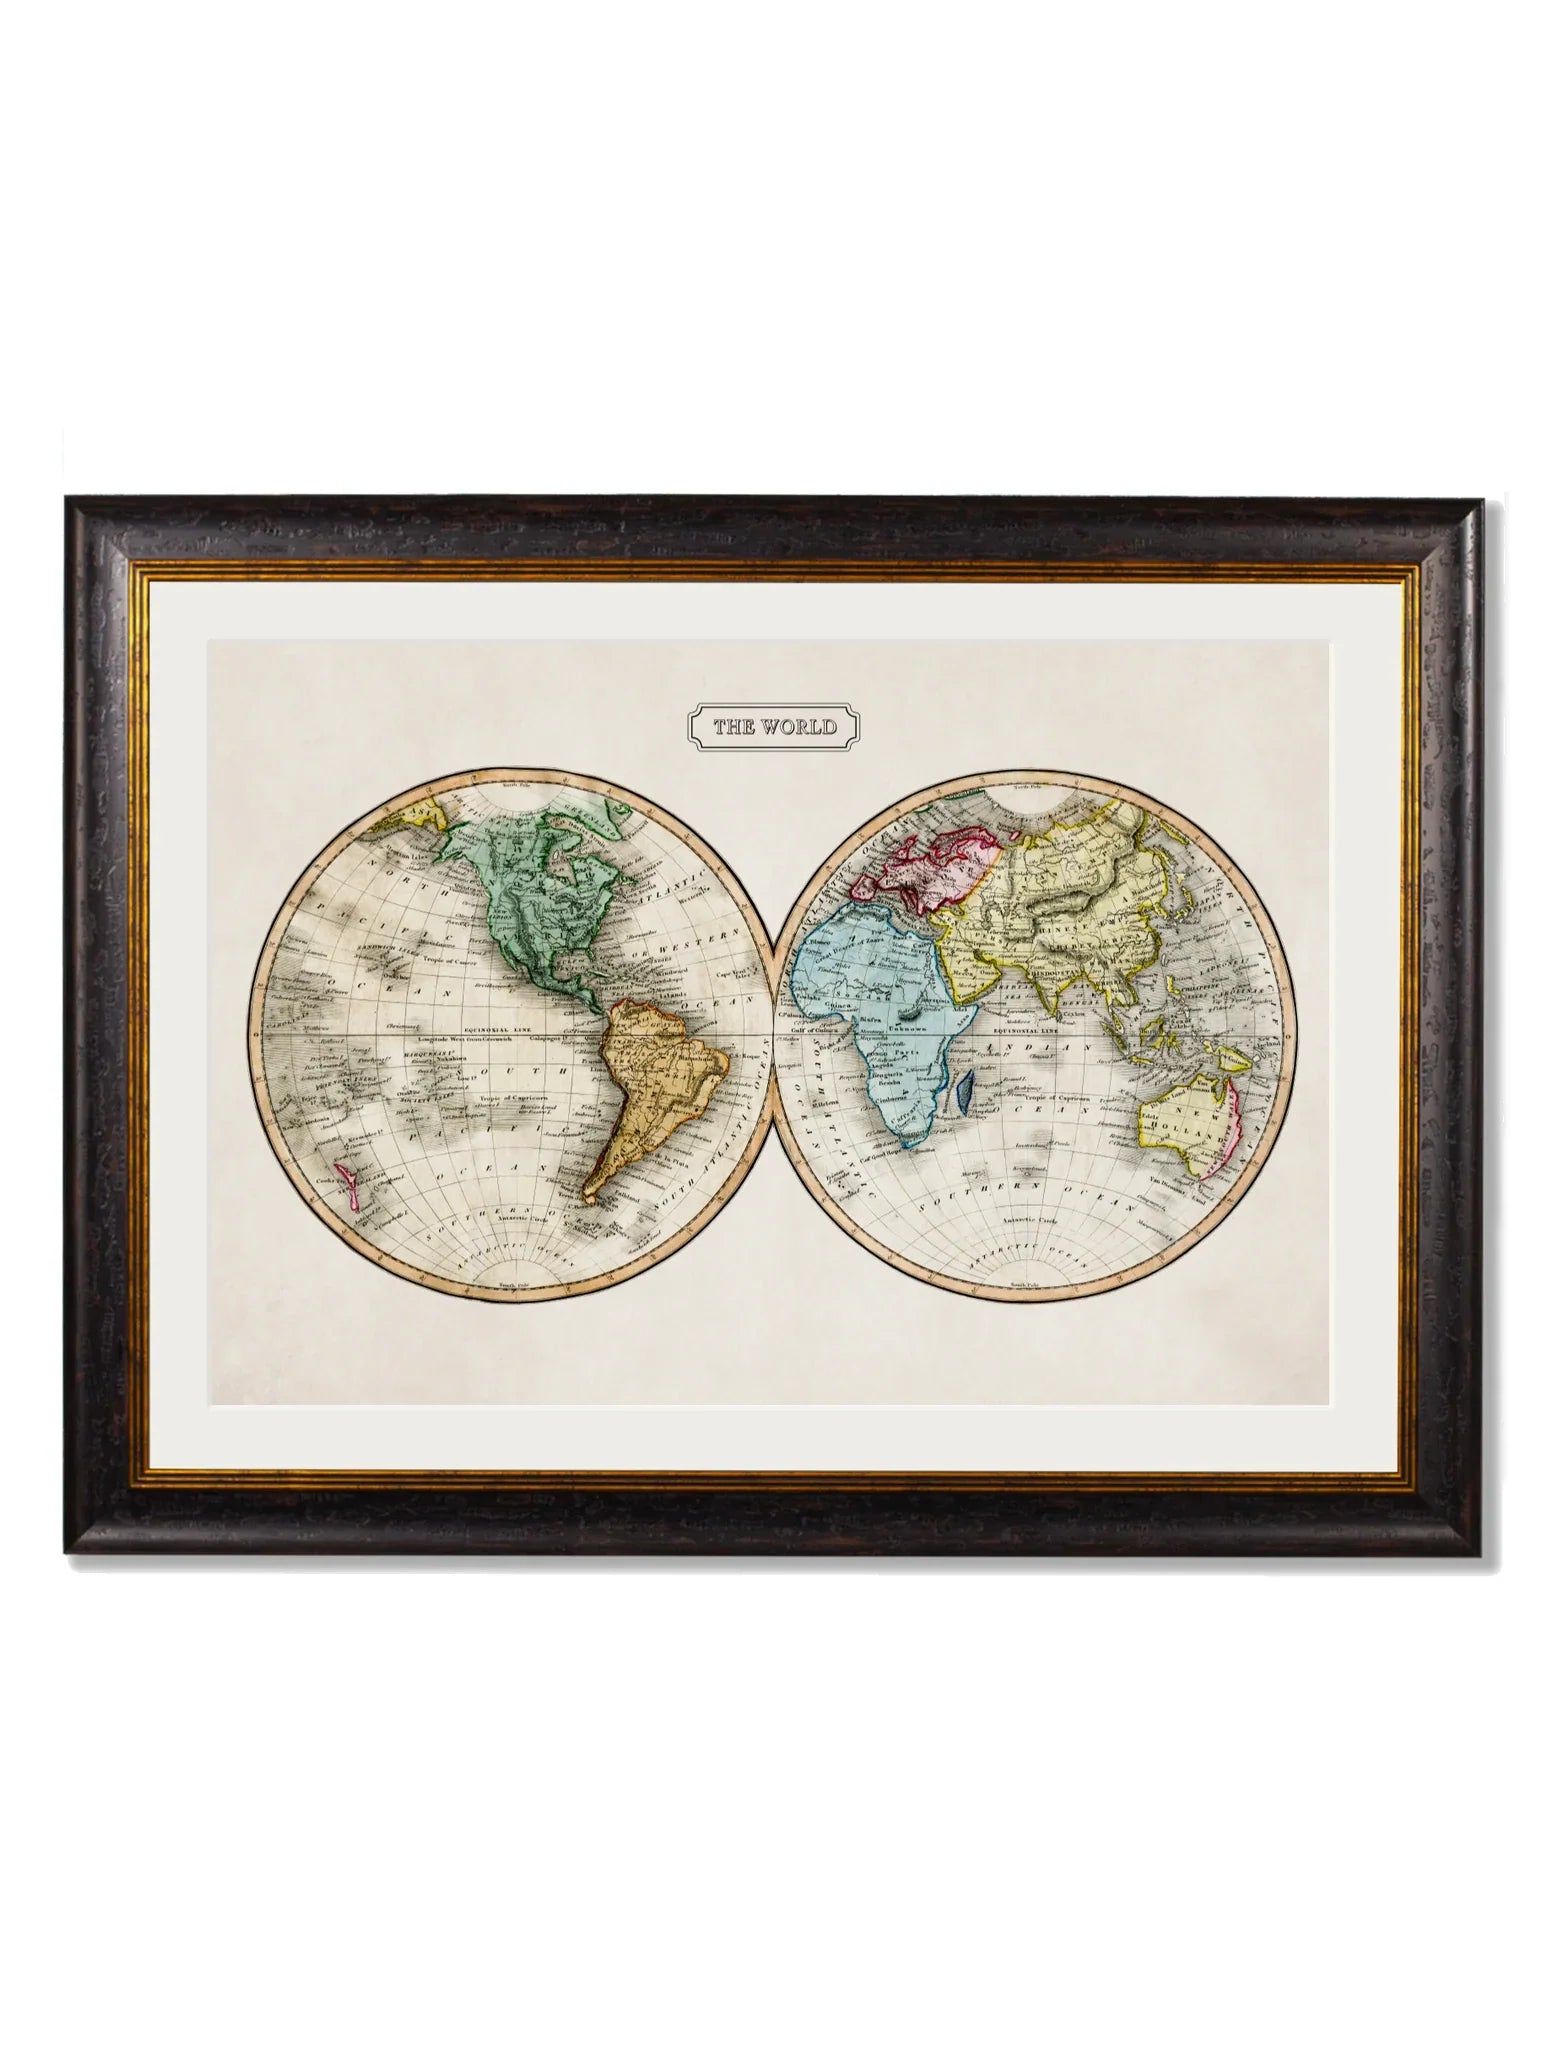 C.1800S Map of The World Frame for sale - Woodcock and Cavendish